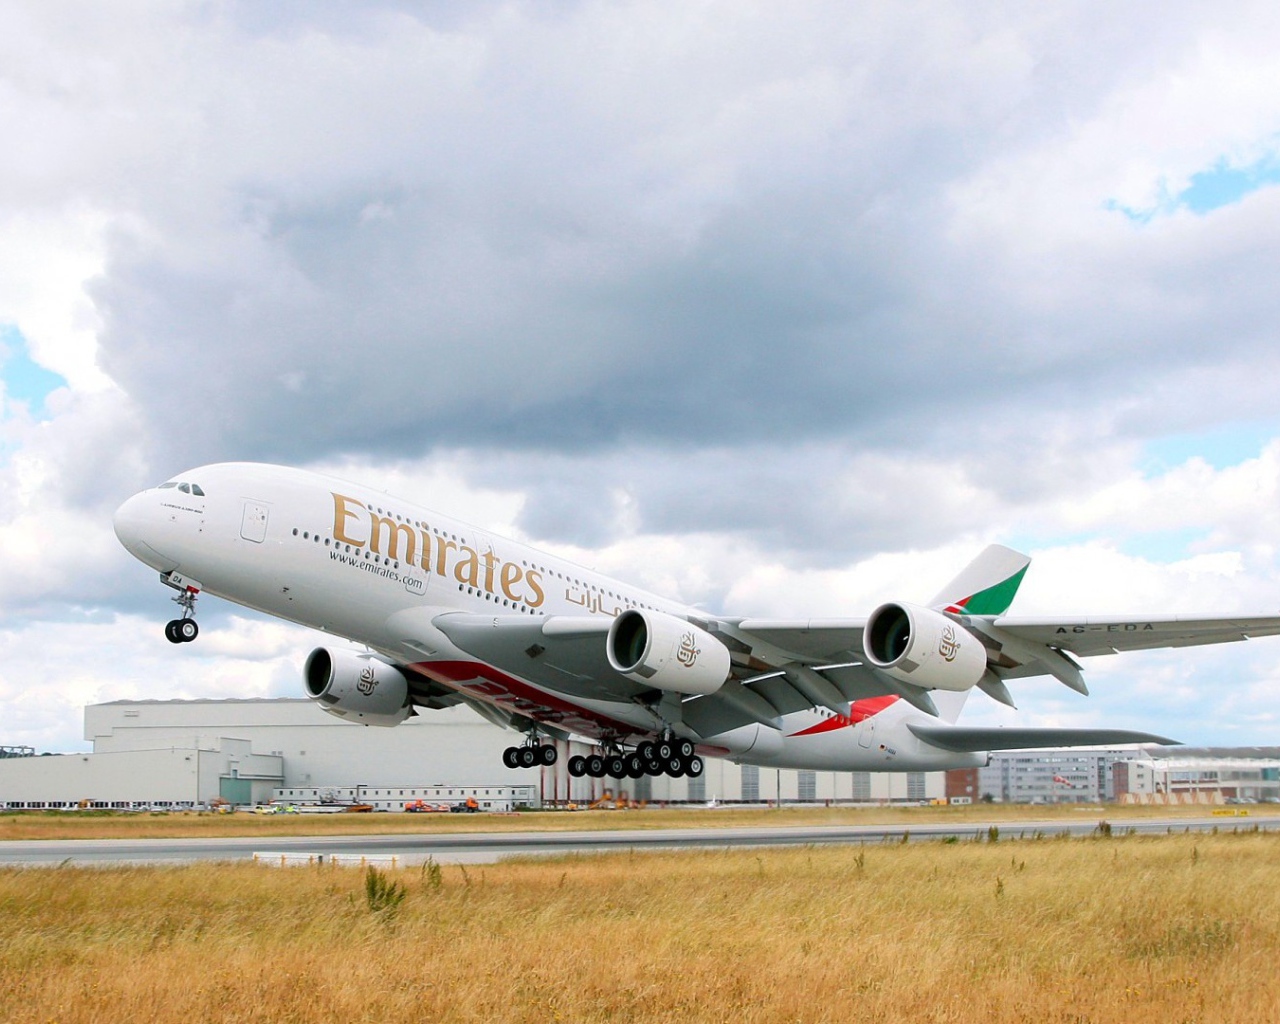 The Airbus A380 Emirates airline on the runway